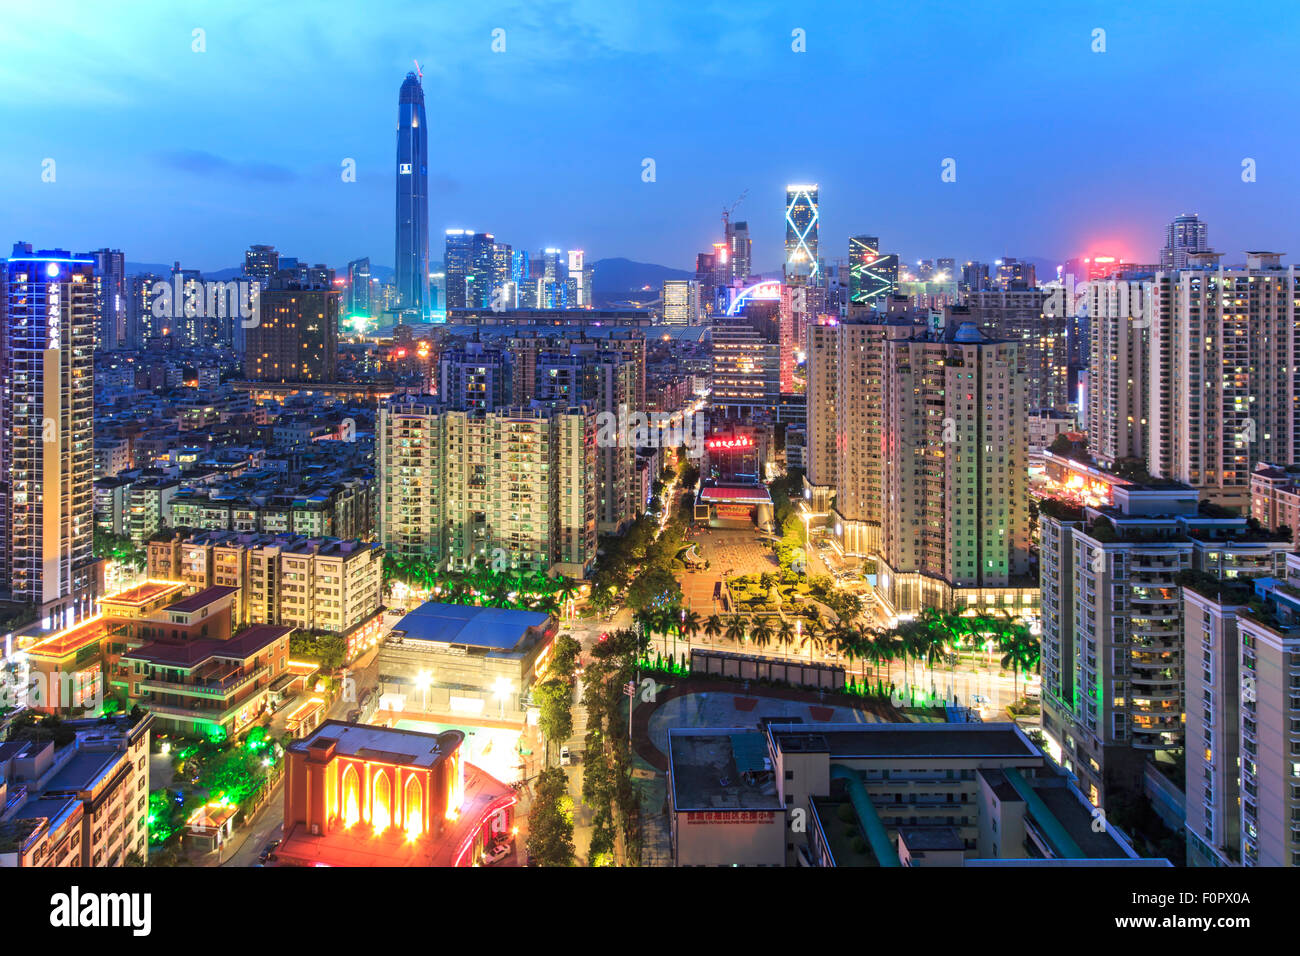 Shenzhen, China - August 19,2015: Shenzhen skyline at twilight with the tallest building of the city on background Stock Photo